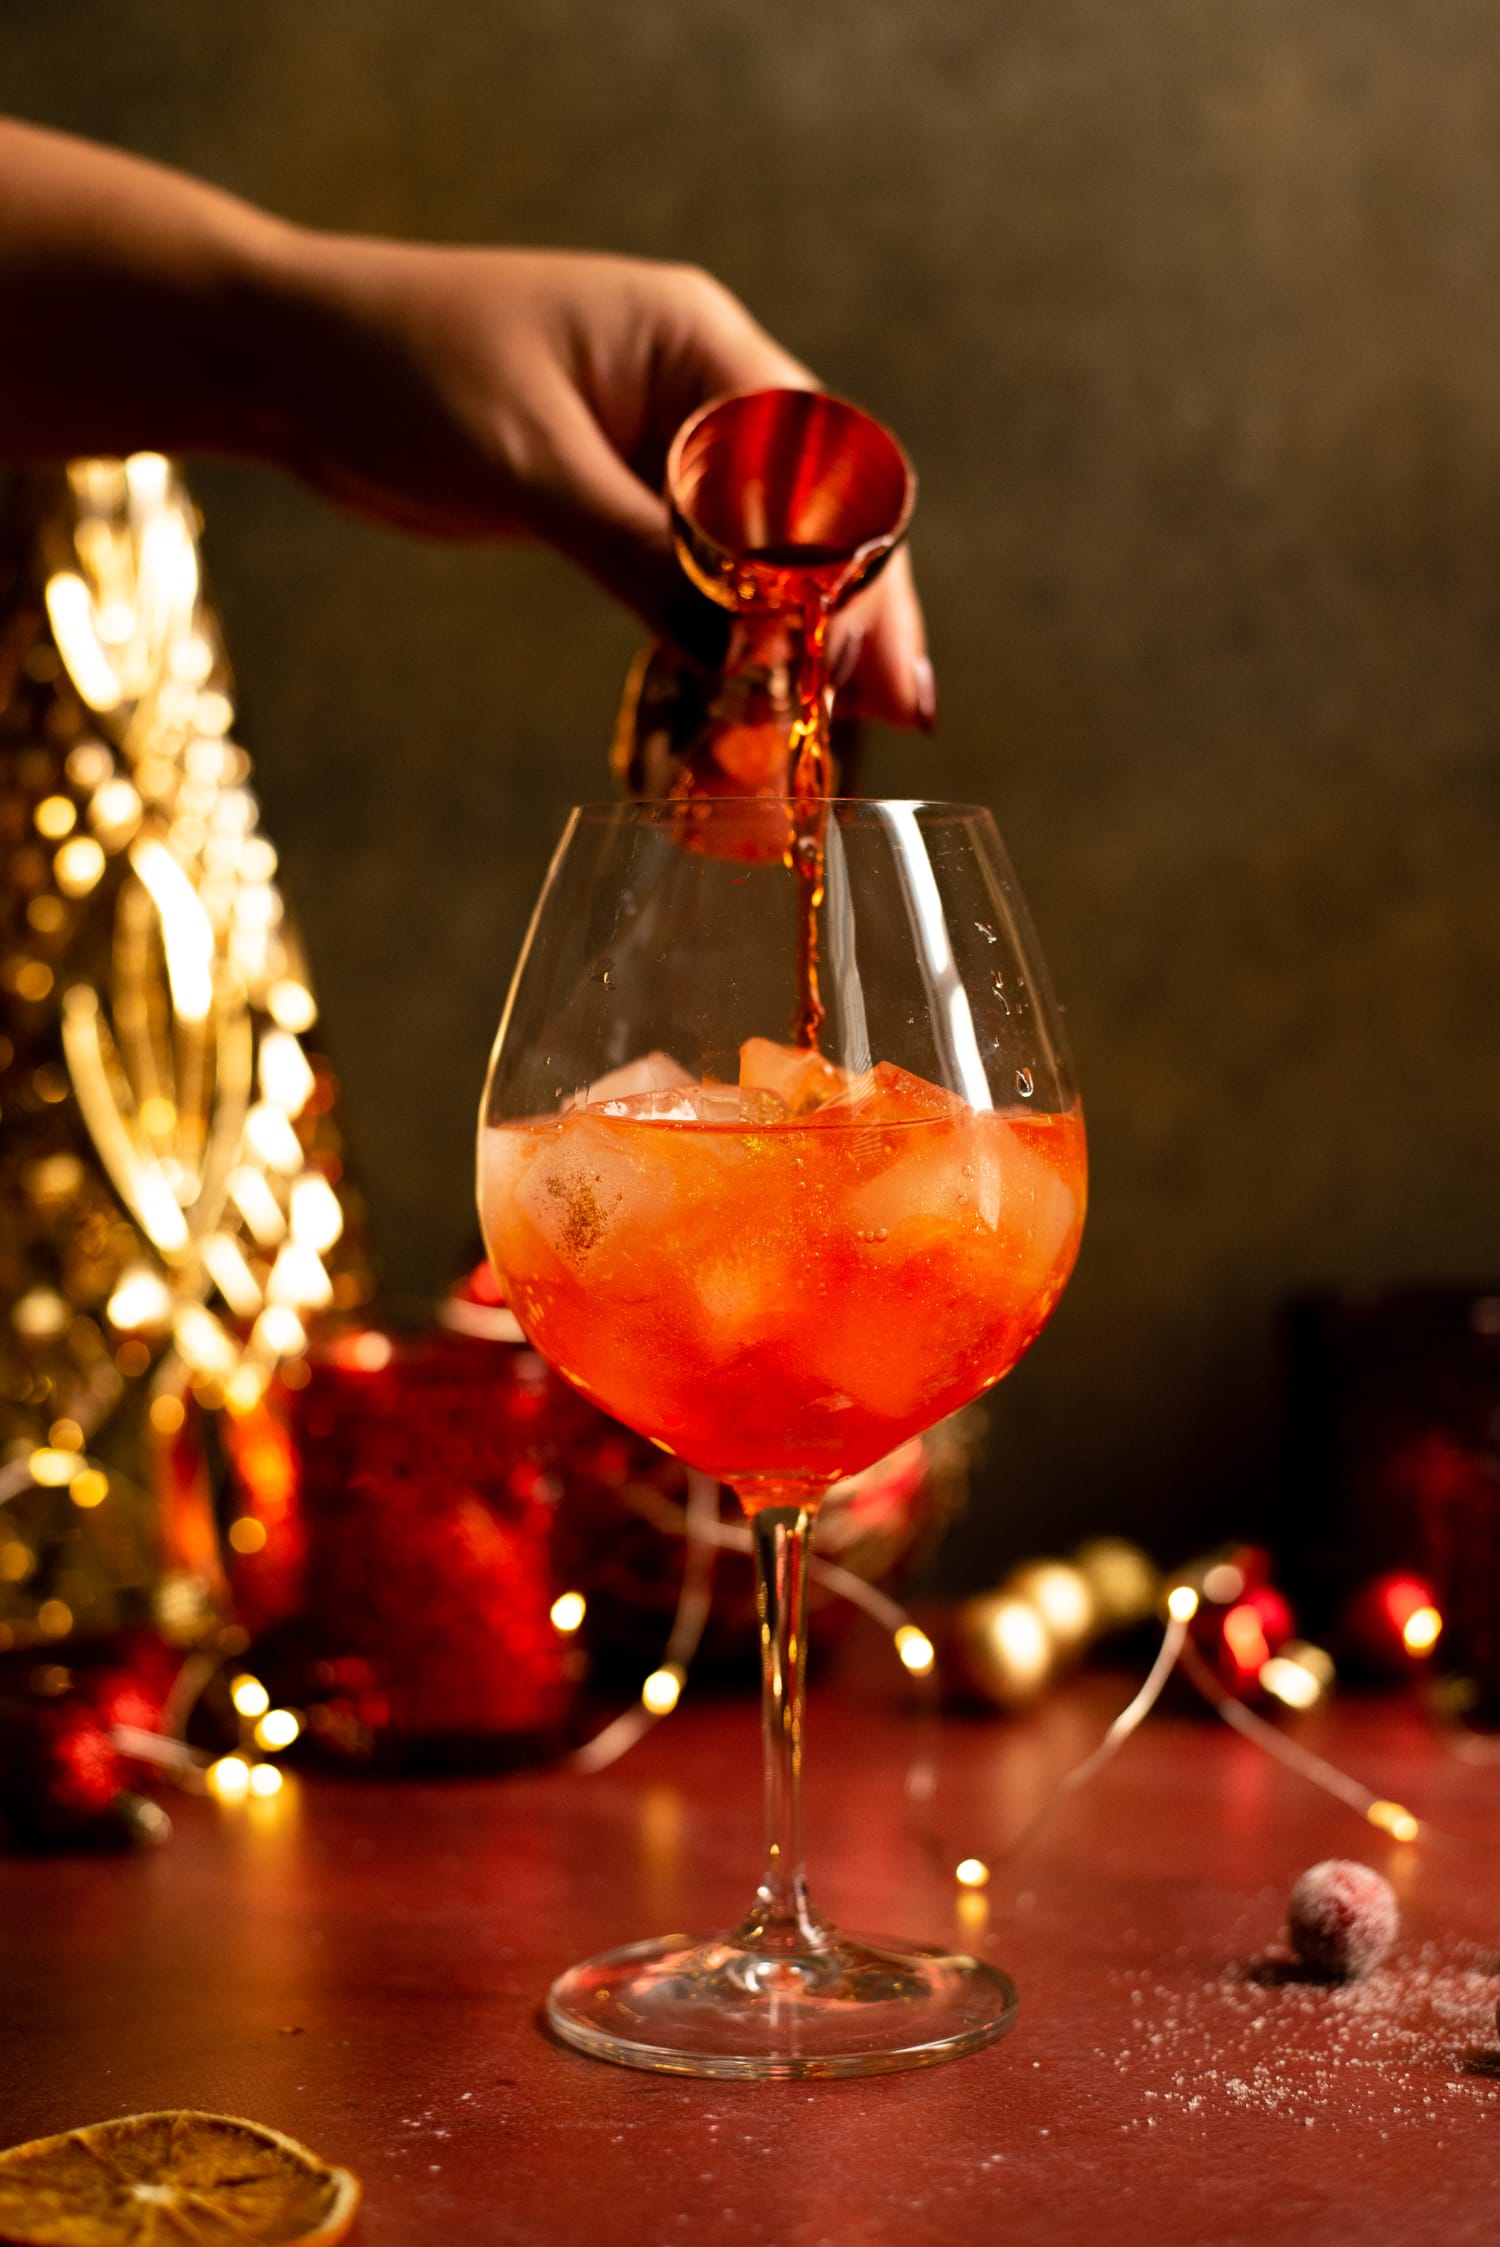 The aperol being poured on top of the processo and ice.